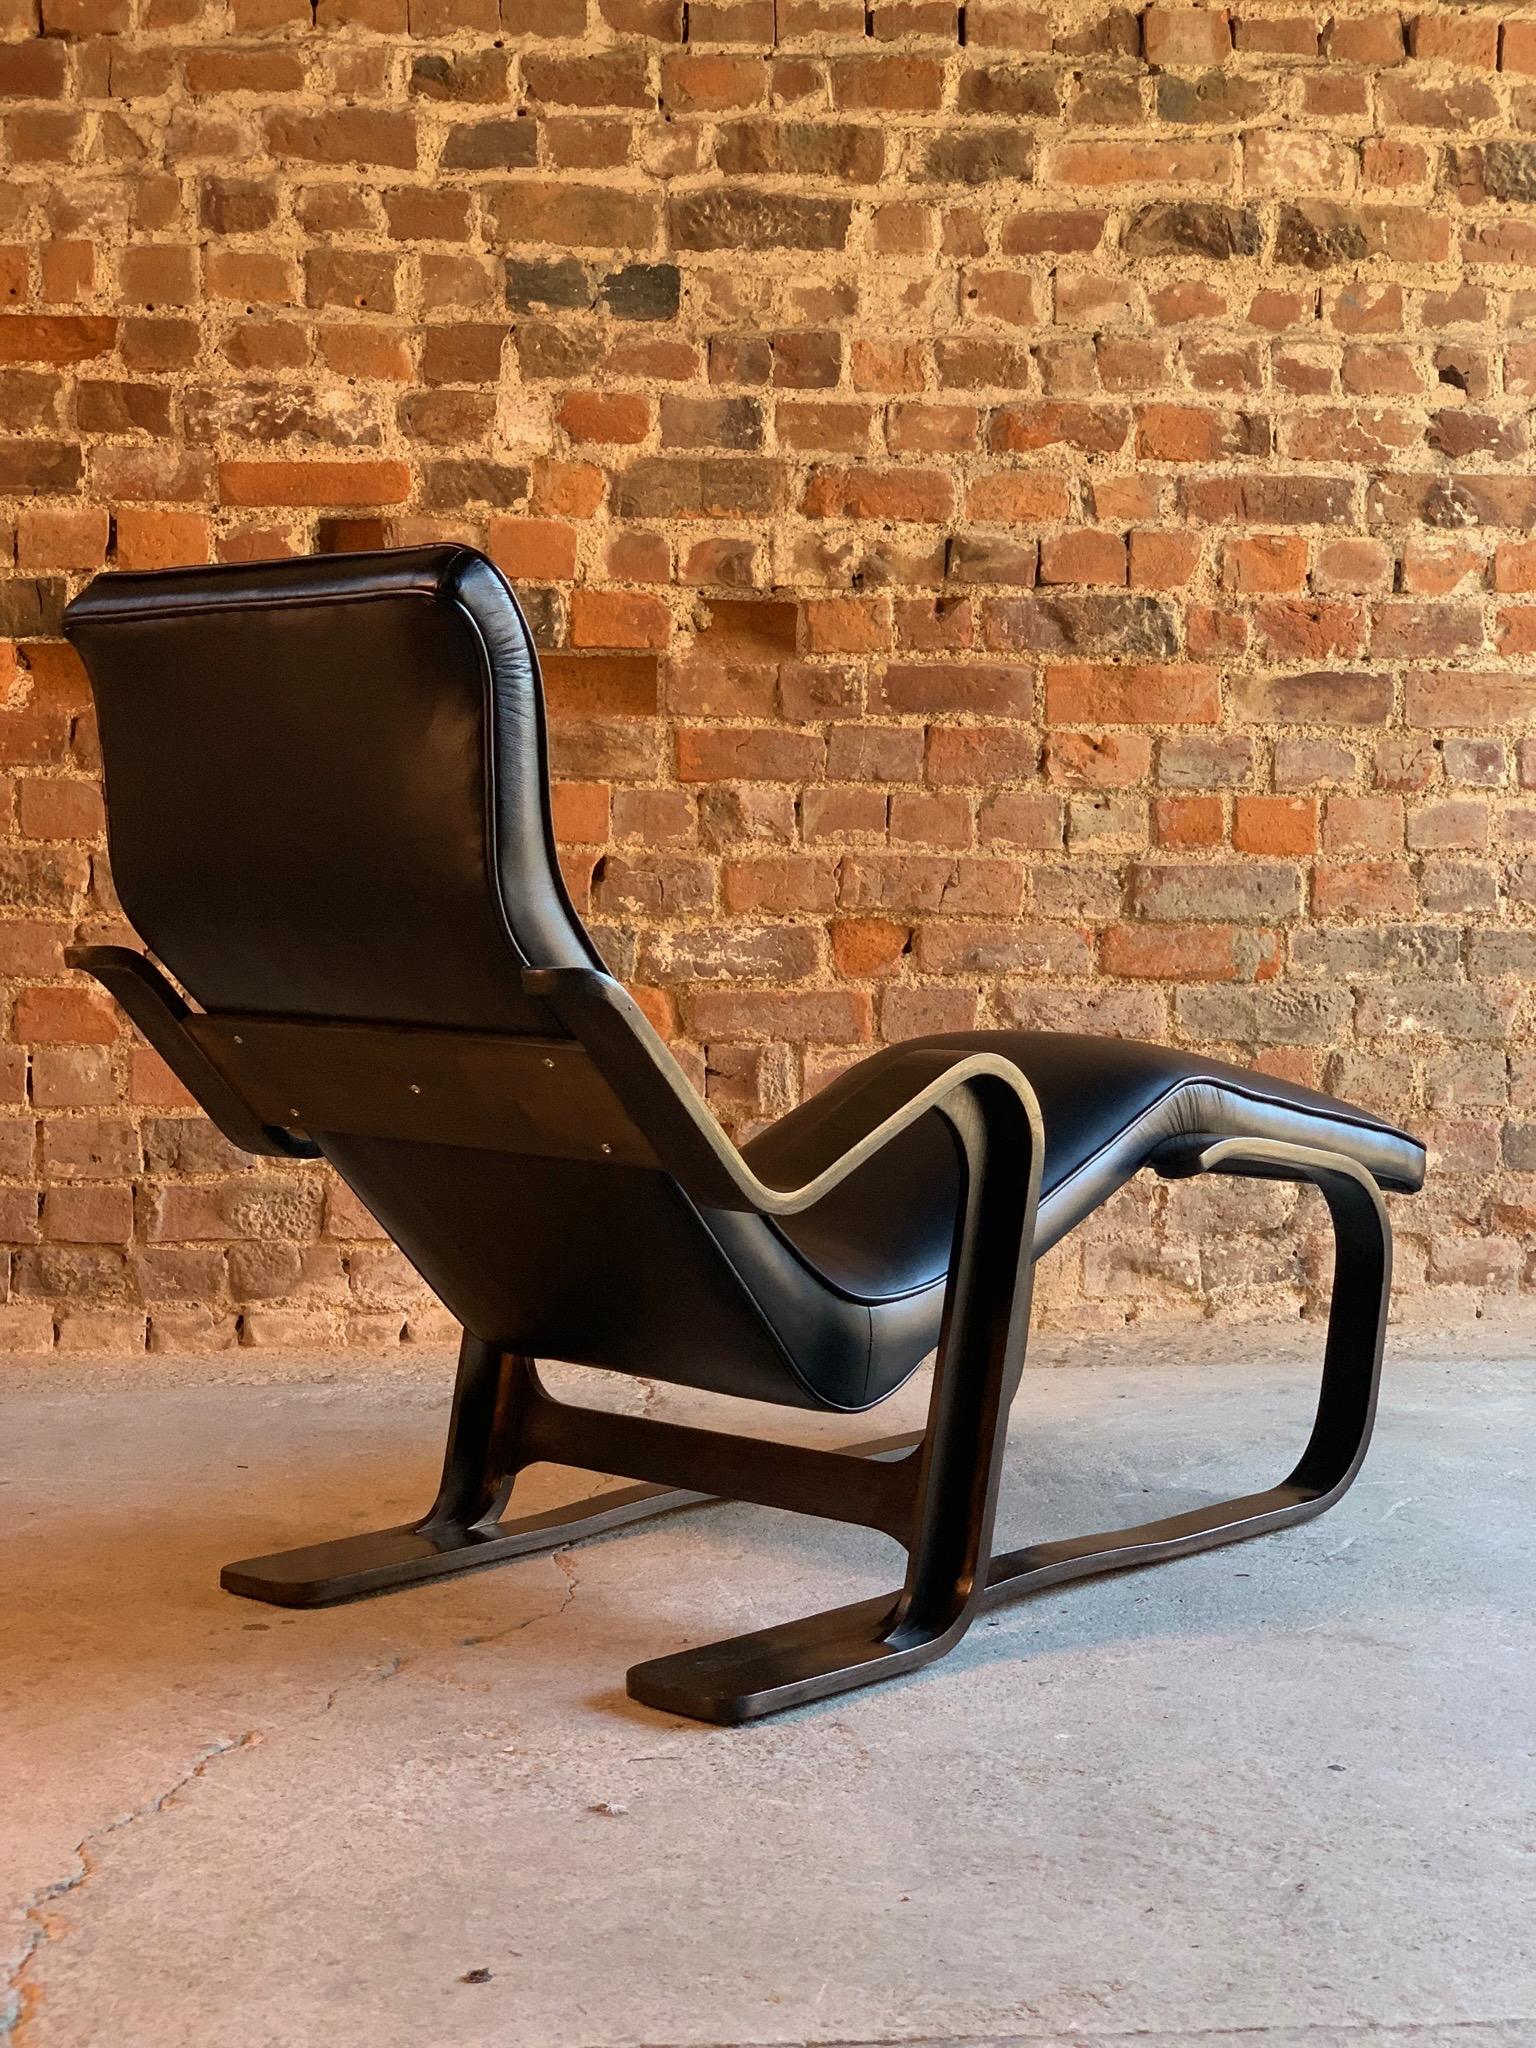 Leather Marcel Breuer Long Chair Chaise Lounge Attr. to Isokon, c 1970 Bauhaus Midcent